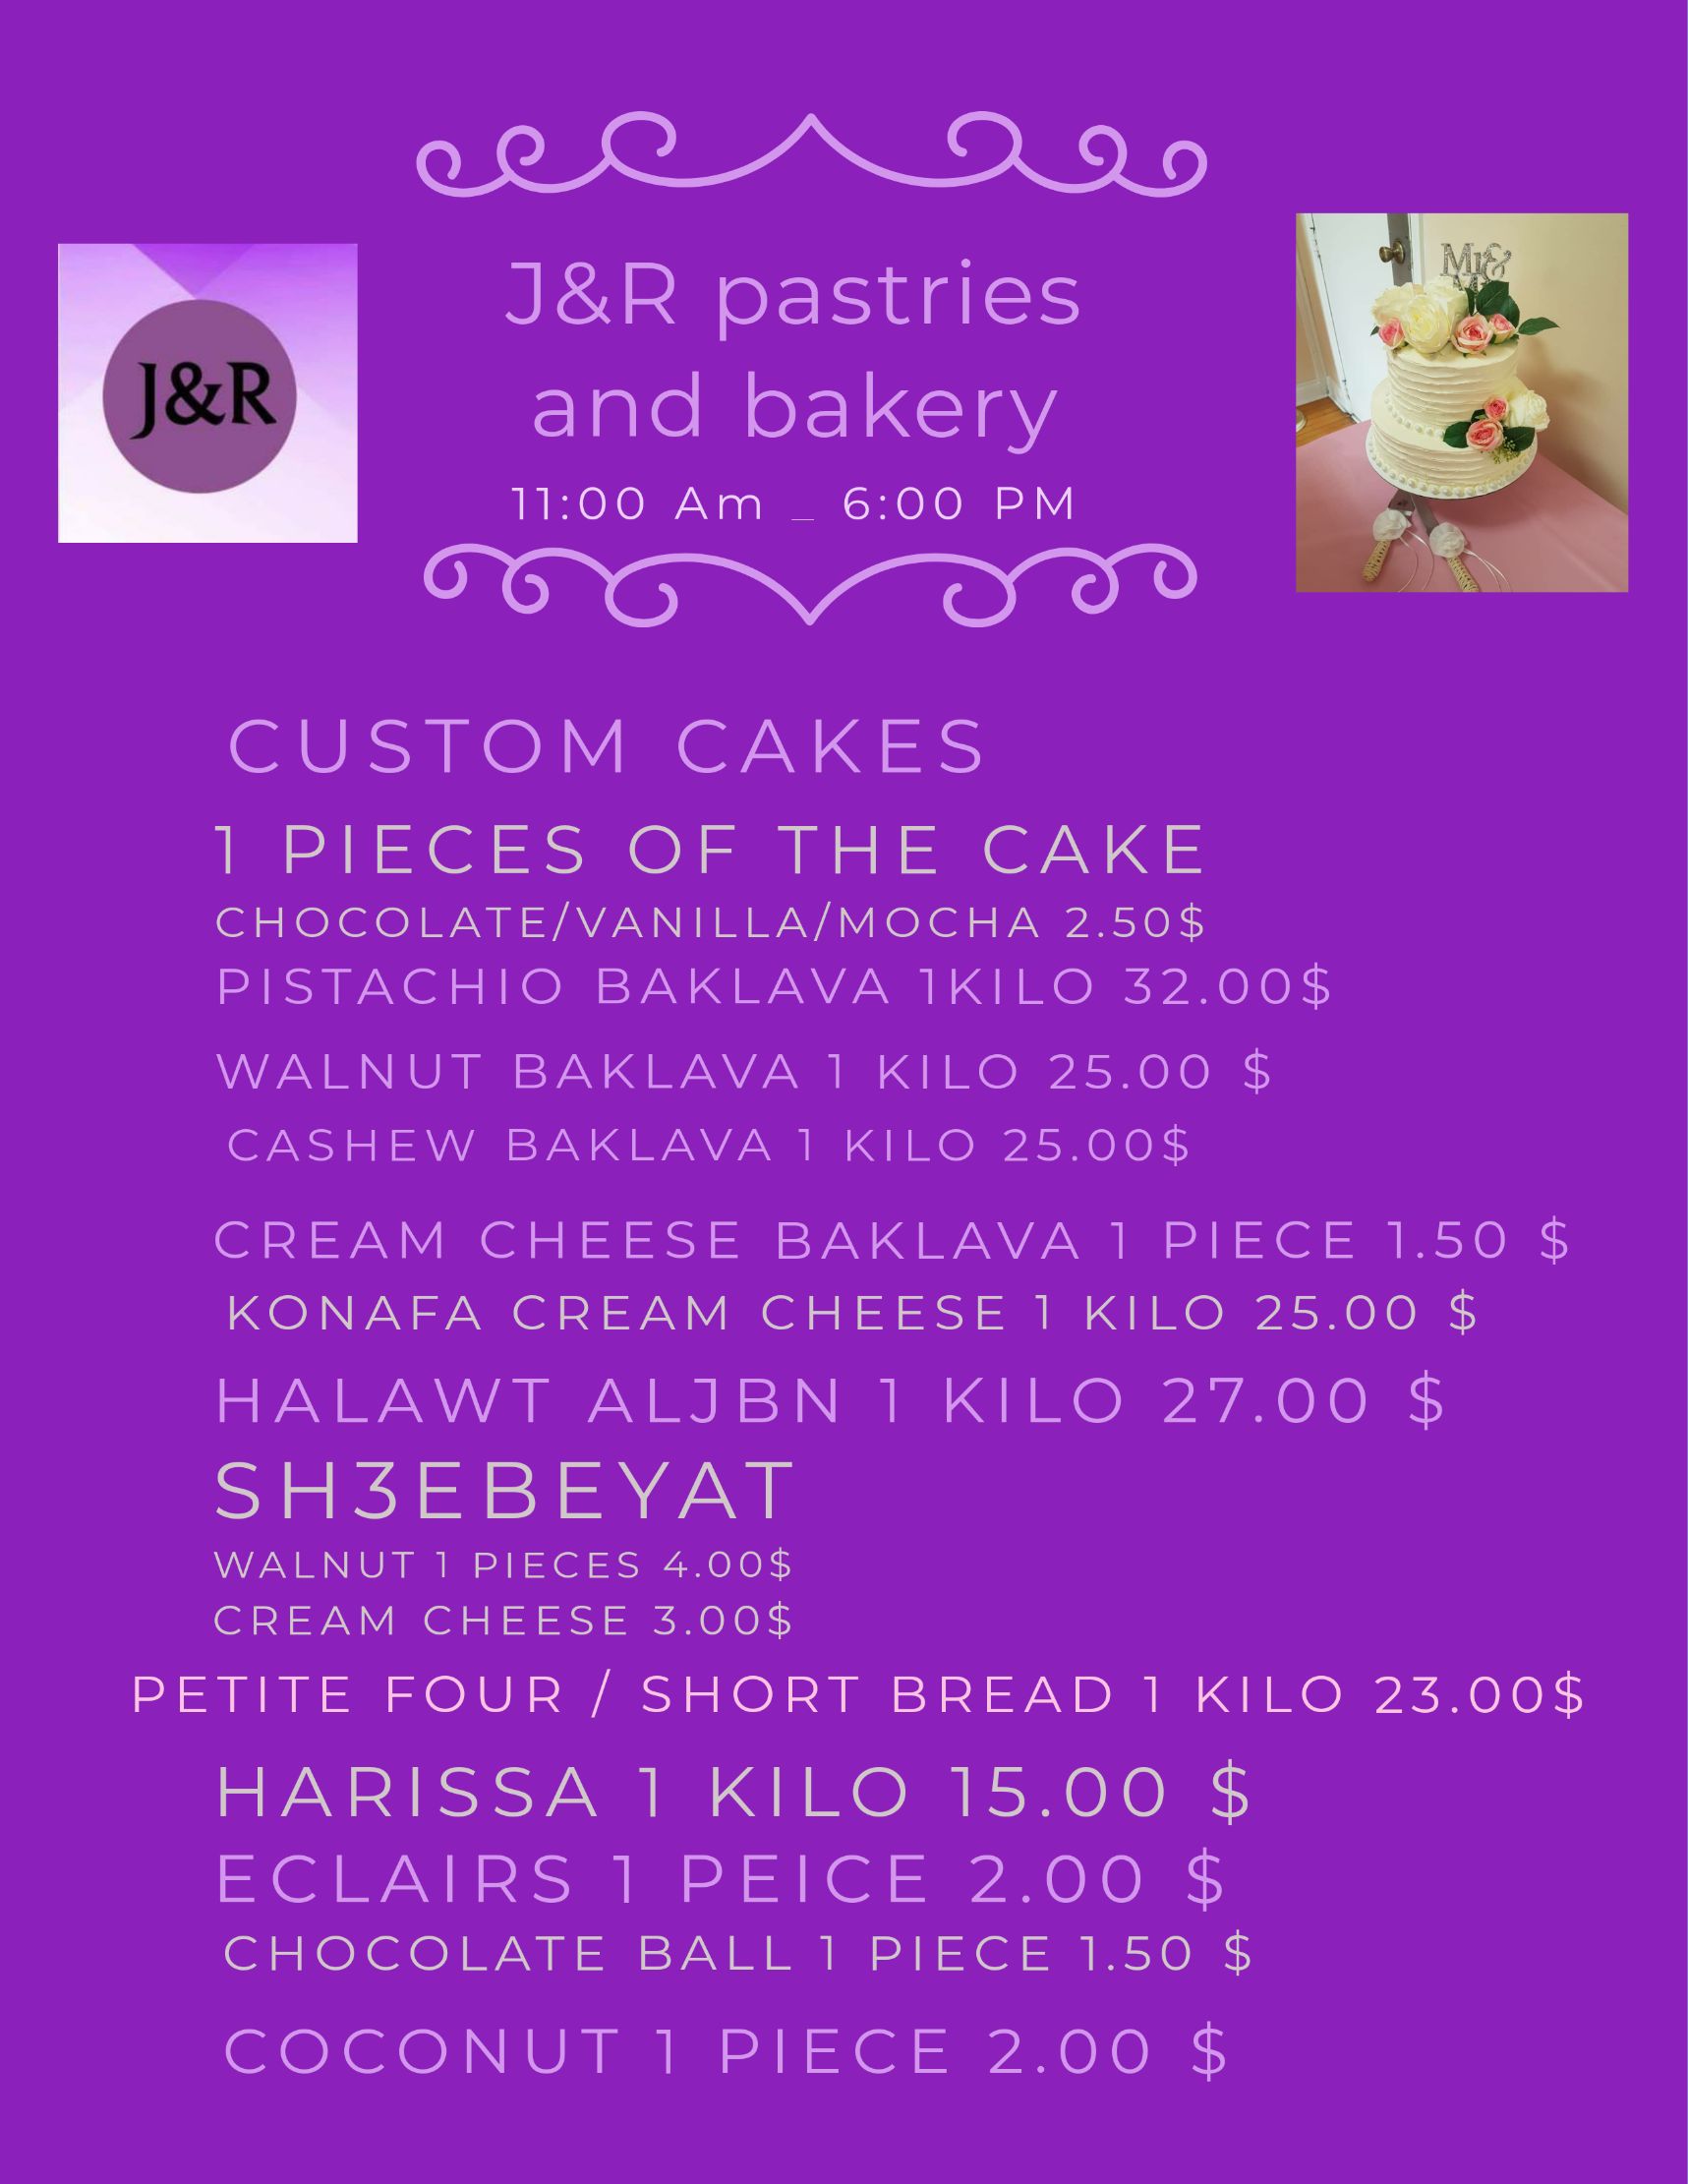 Menu for J&R pastries and bakery